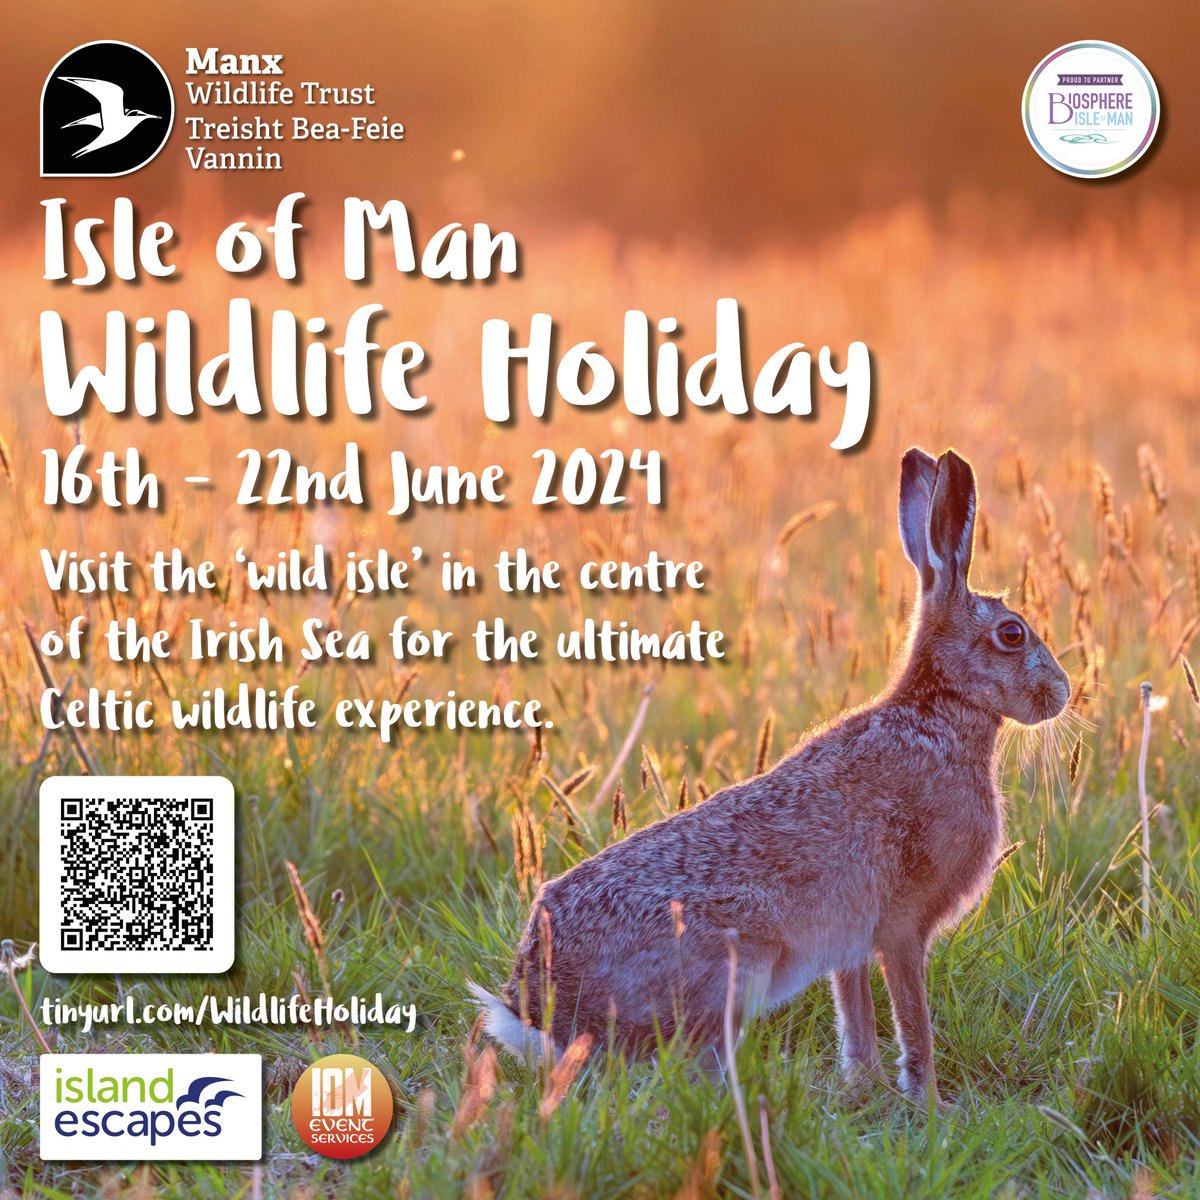 One to share! A wildlife experience for visitors to enjoy the wonders of the natural world in the Isle of Man! Luxury accommodation and a schedule packed with excursions led by local wildlife experts. Book now! tinyurl.com/WildlifeHoliday #TeamWilder #IsleofMan #Wildlifeholiday